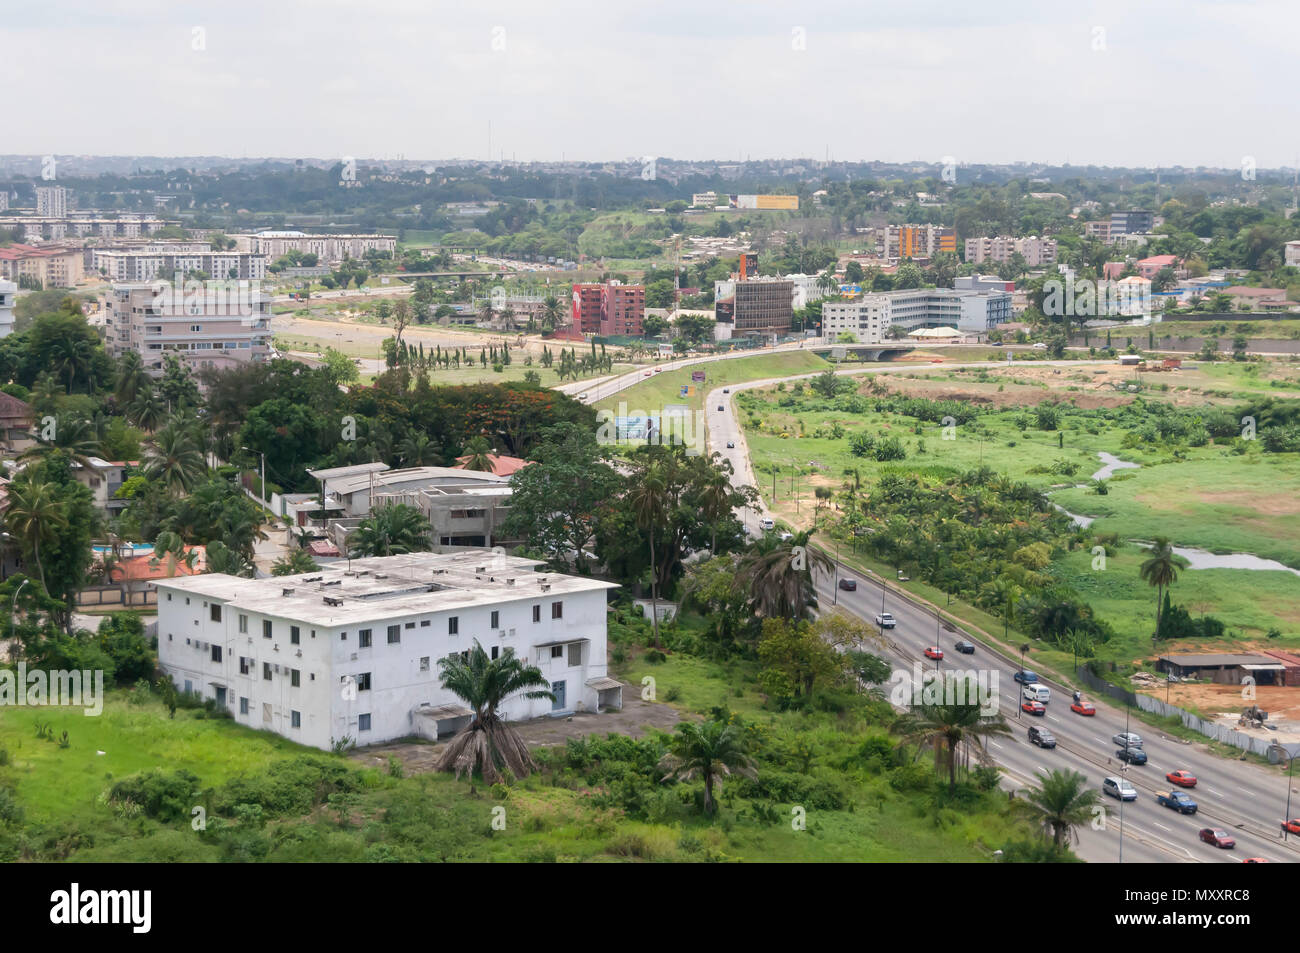 ABIDJAN, IVORY COAST, AFRICA. April 2016. The view of Cocody, one of the quarters of Abidjan, the largest city in the Ivory Coast. Abidjan cityscape. Stock Photo